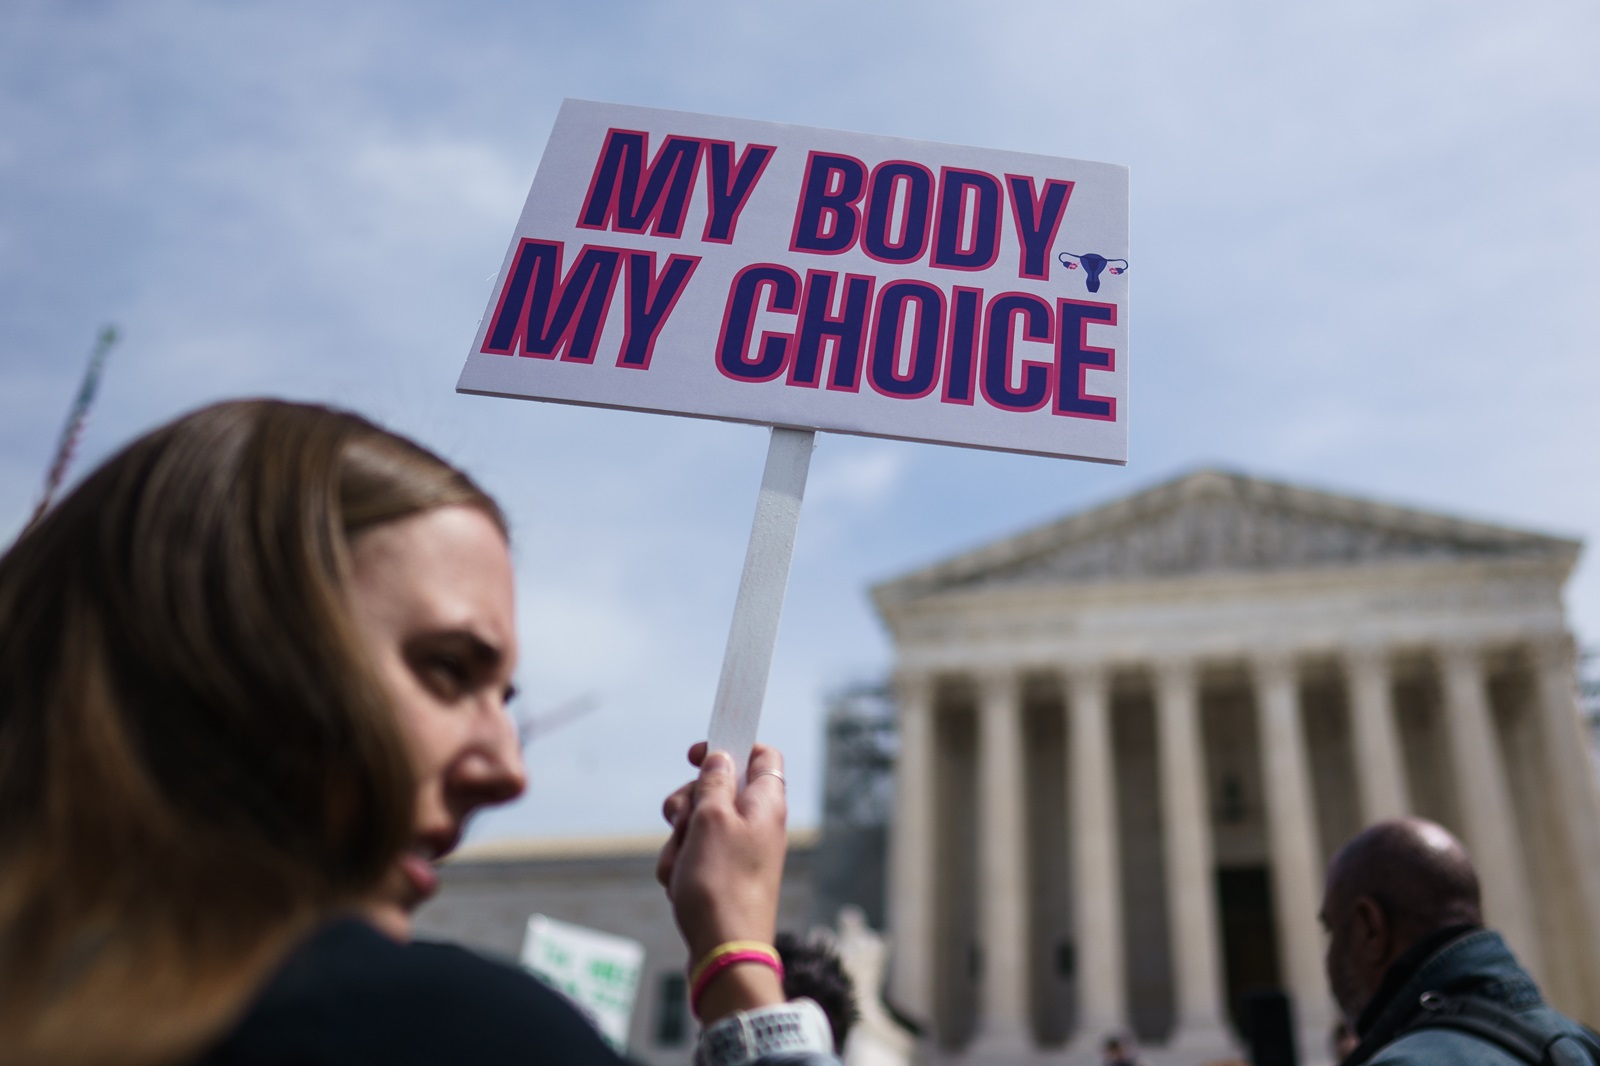 epa11244961 A pro-choice protester raises a placard  outside of the US Supreme Court, during a hearing to restrict an FDA-approved medication, in Washington DC, USA, 26 March 2024. The US Supreme Court is hearing oral arguments on the restriction of the drug Mifepristone, which combined with another drug can be used for abortions.  EPA/WILL OLIVER